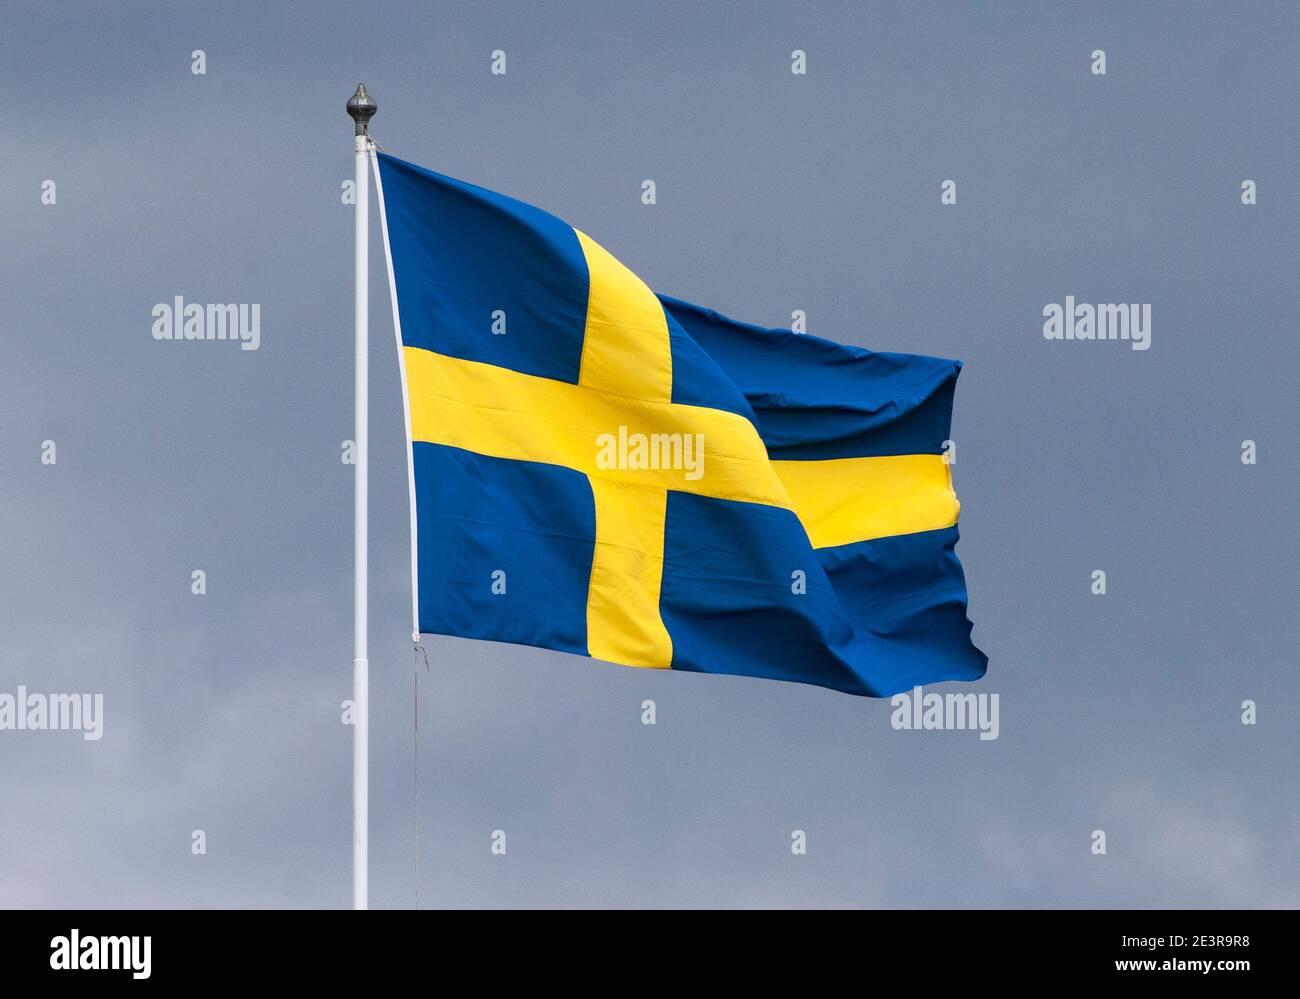 SWEDISH FLAG on pole flutter in wind Stock Photo